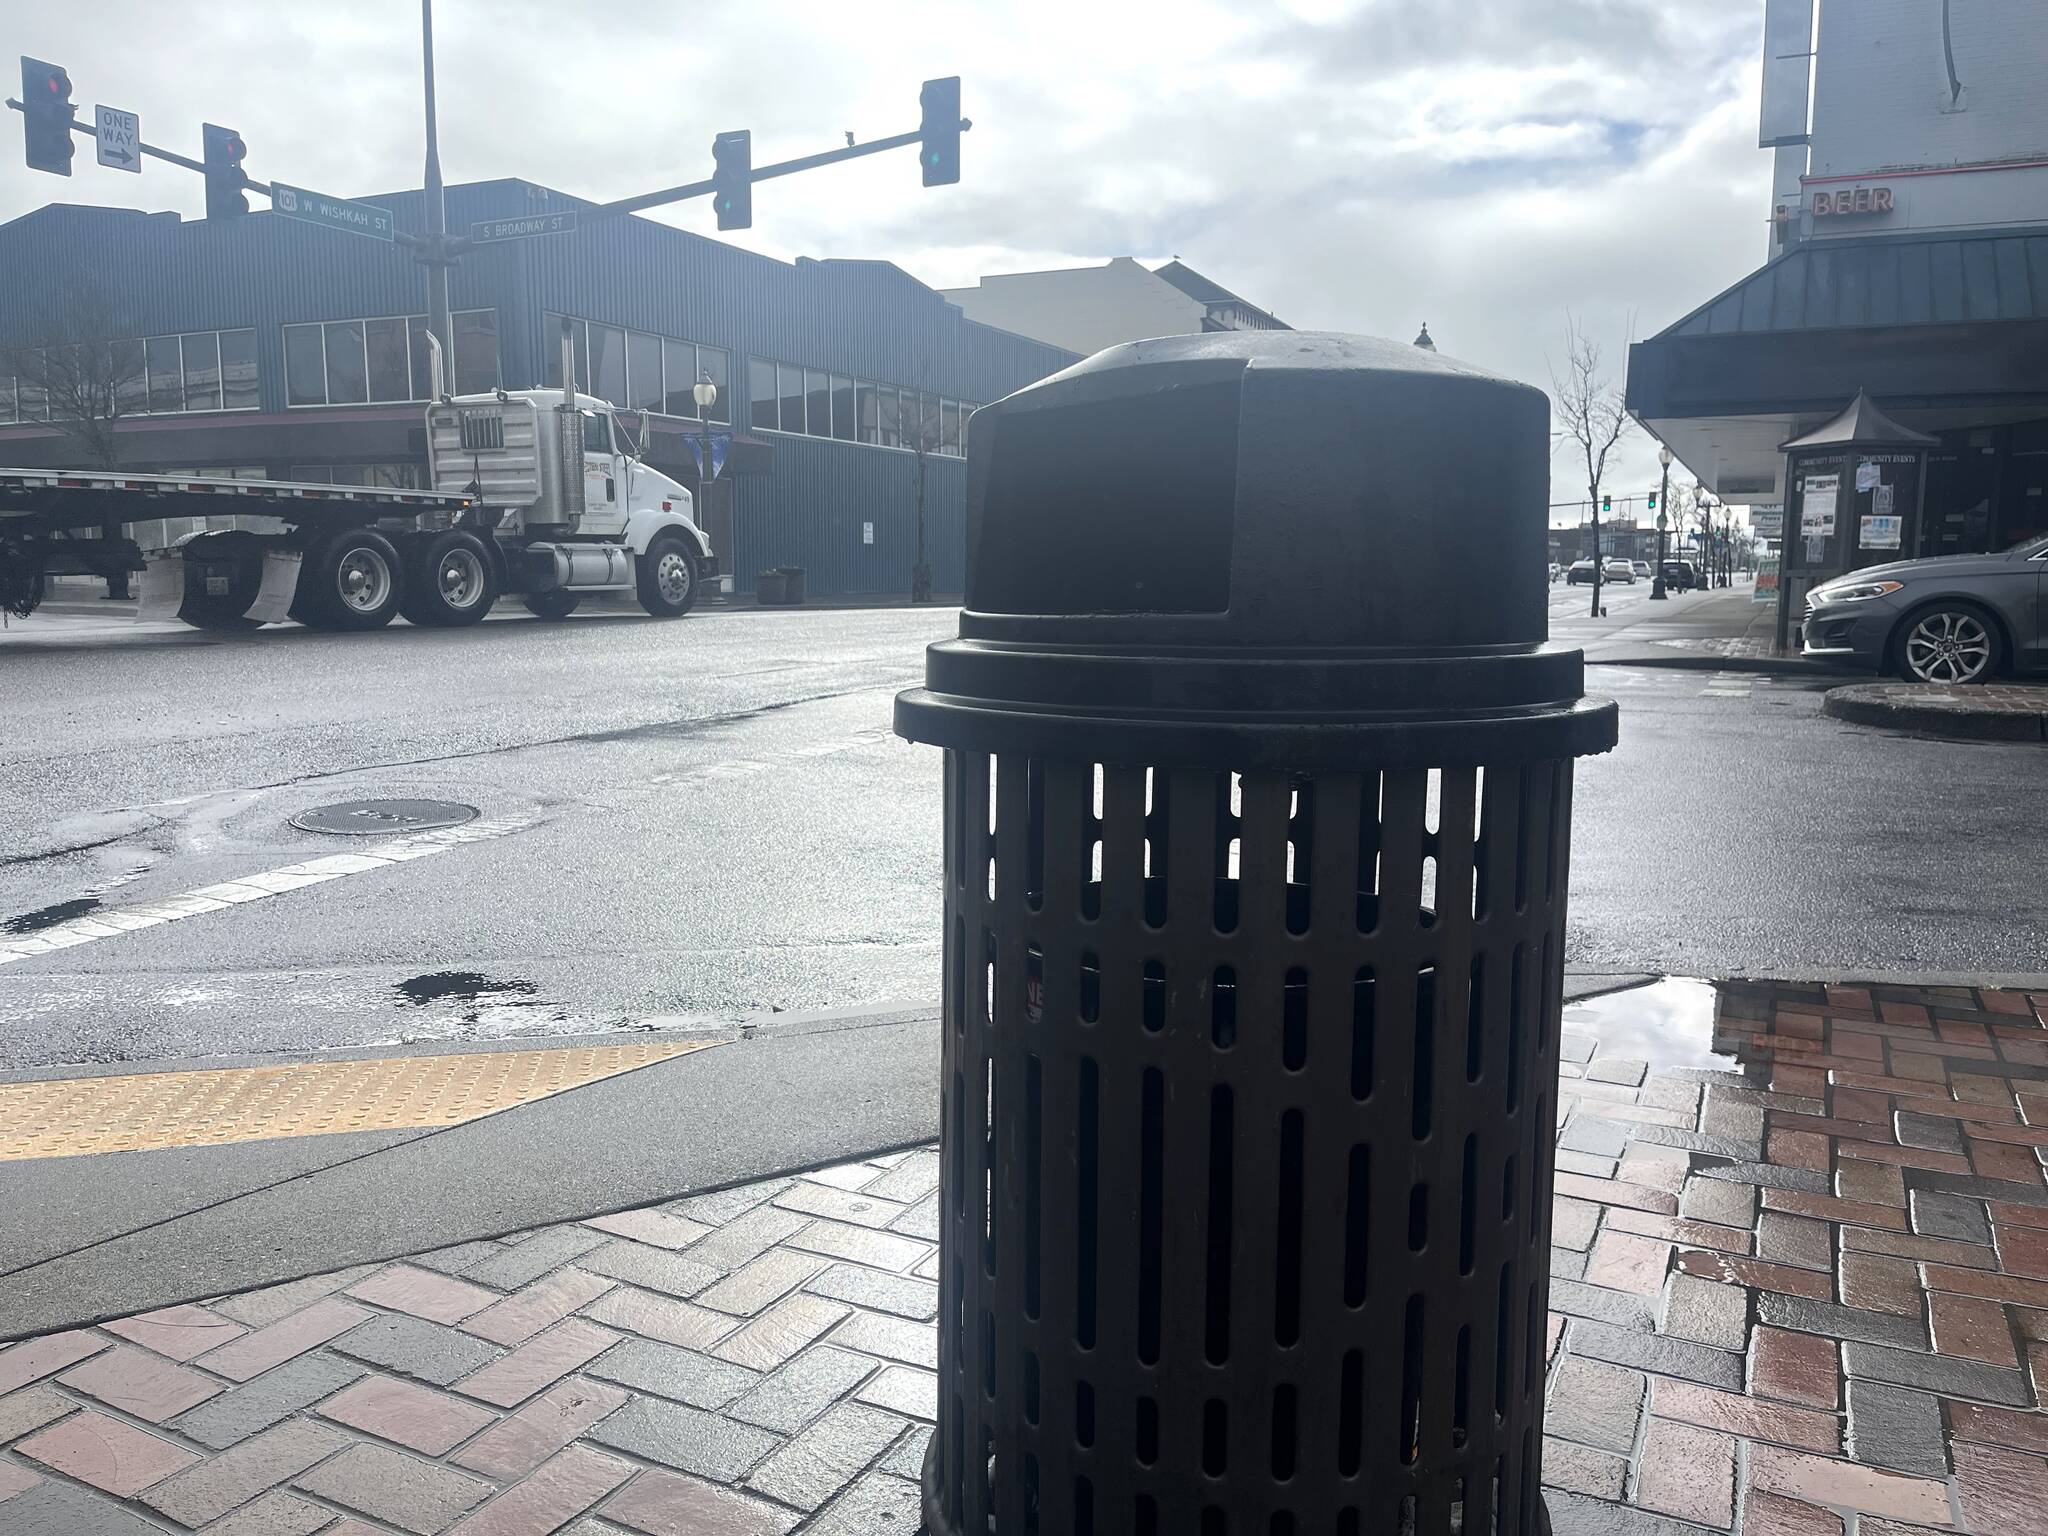 Soon the City of Aberdeen, through a five-year contract with Big Belly, will bolster its waste management with a better looking, “smart” garbage can from Bigbelly. The Bigbelly cans will be fully-enclosed where people can only throw garbage in, not pull it out. Some of the cans will also have a fullness indicator and some will also have a compactor element and be either solar- or battery-powered. (Matthew N. Wells / The Daily World)